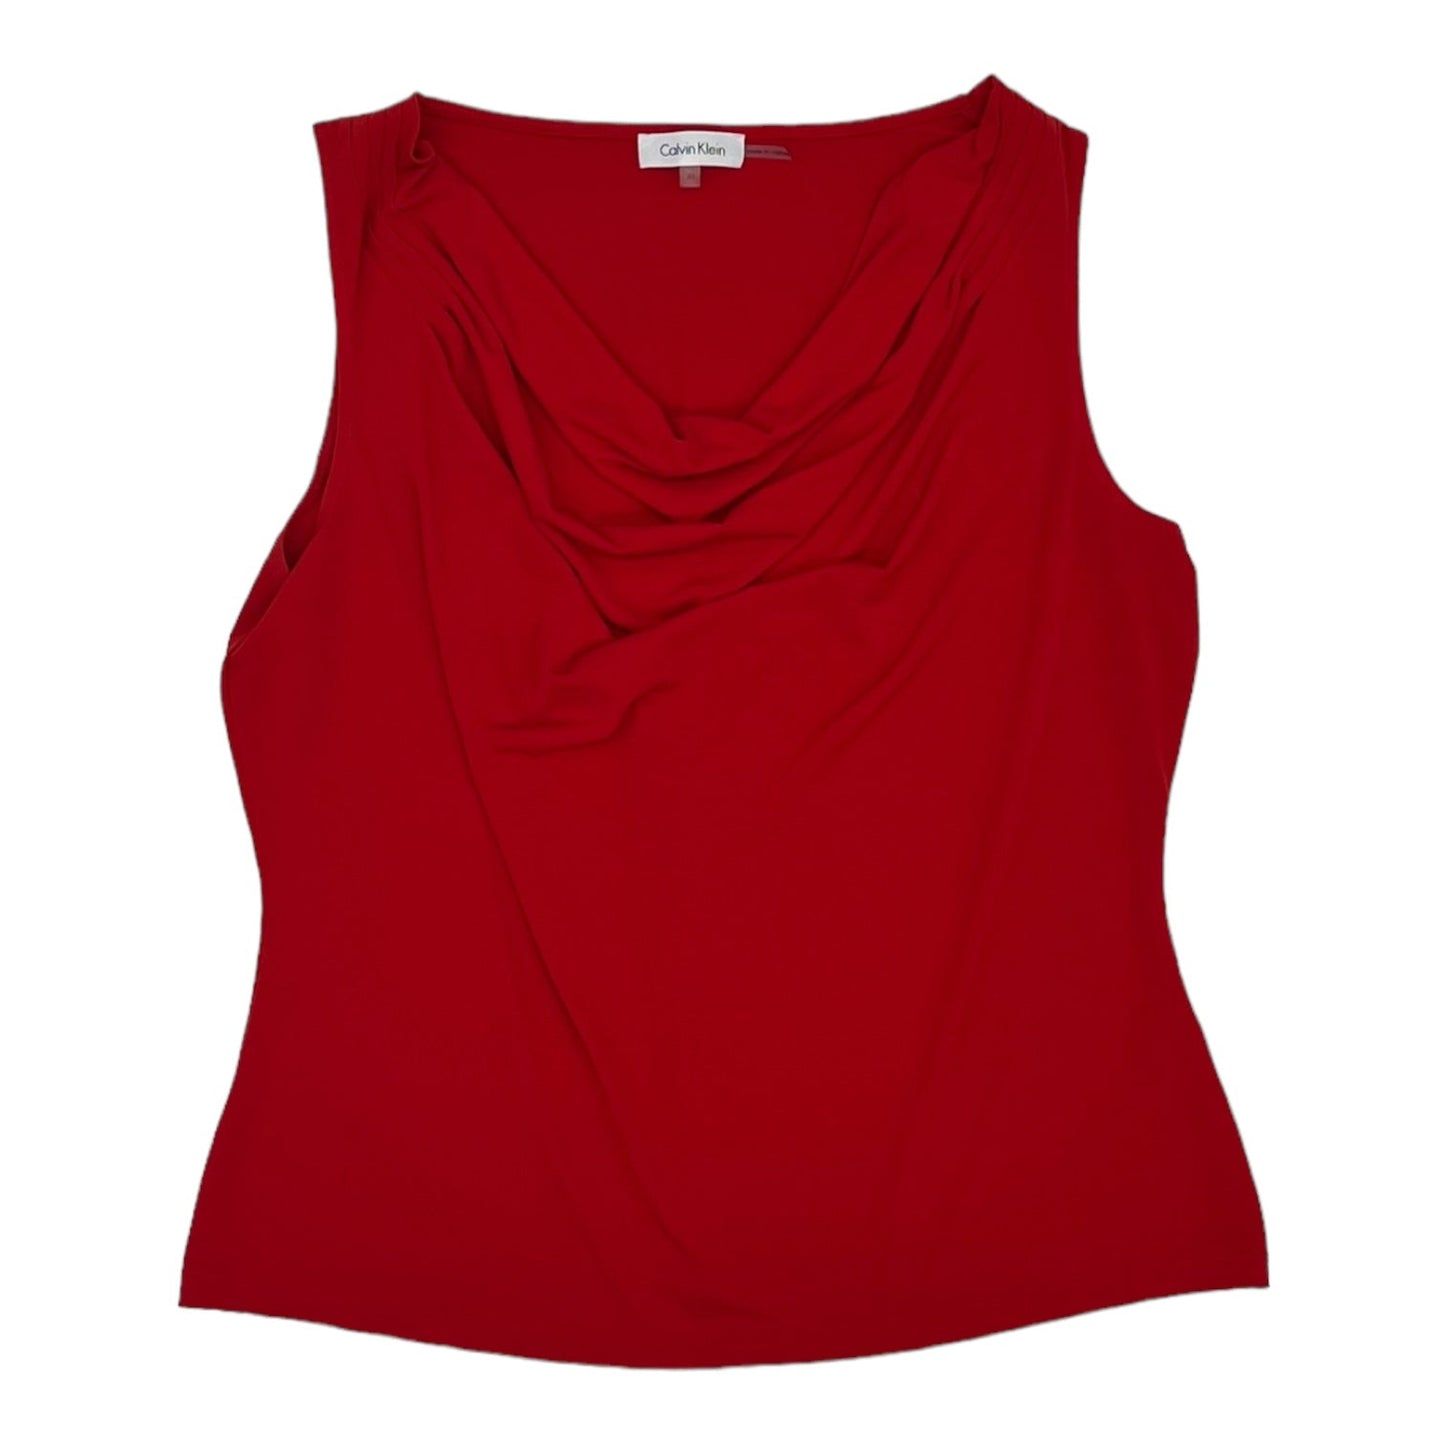 RED TOP SLEEVELESS by CALVIN KLEIN Size:XL